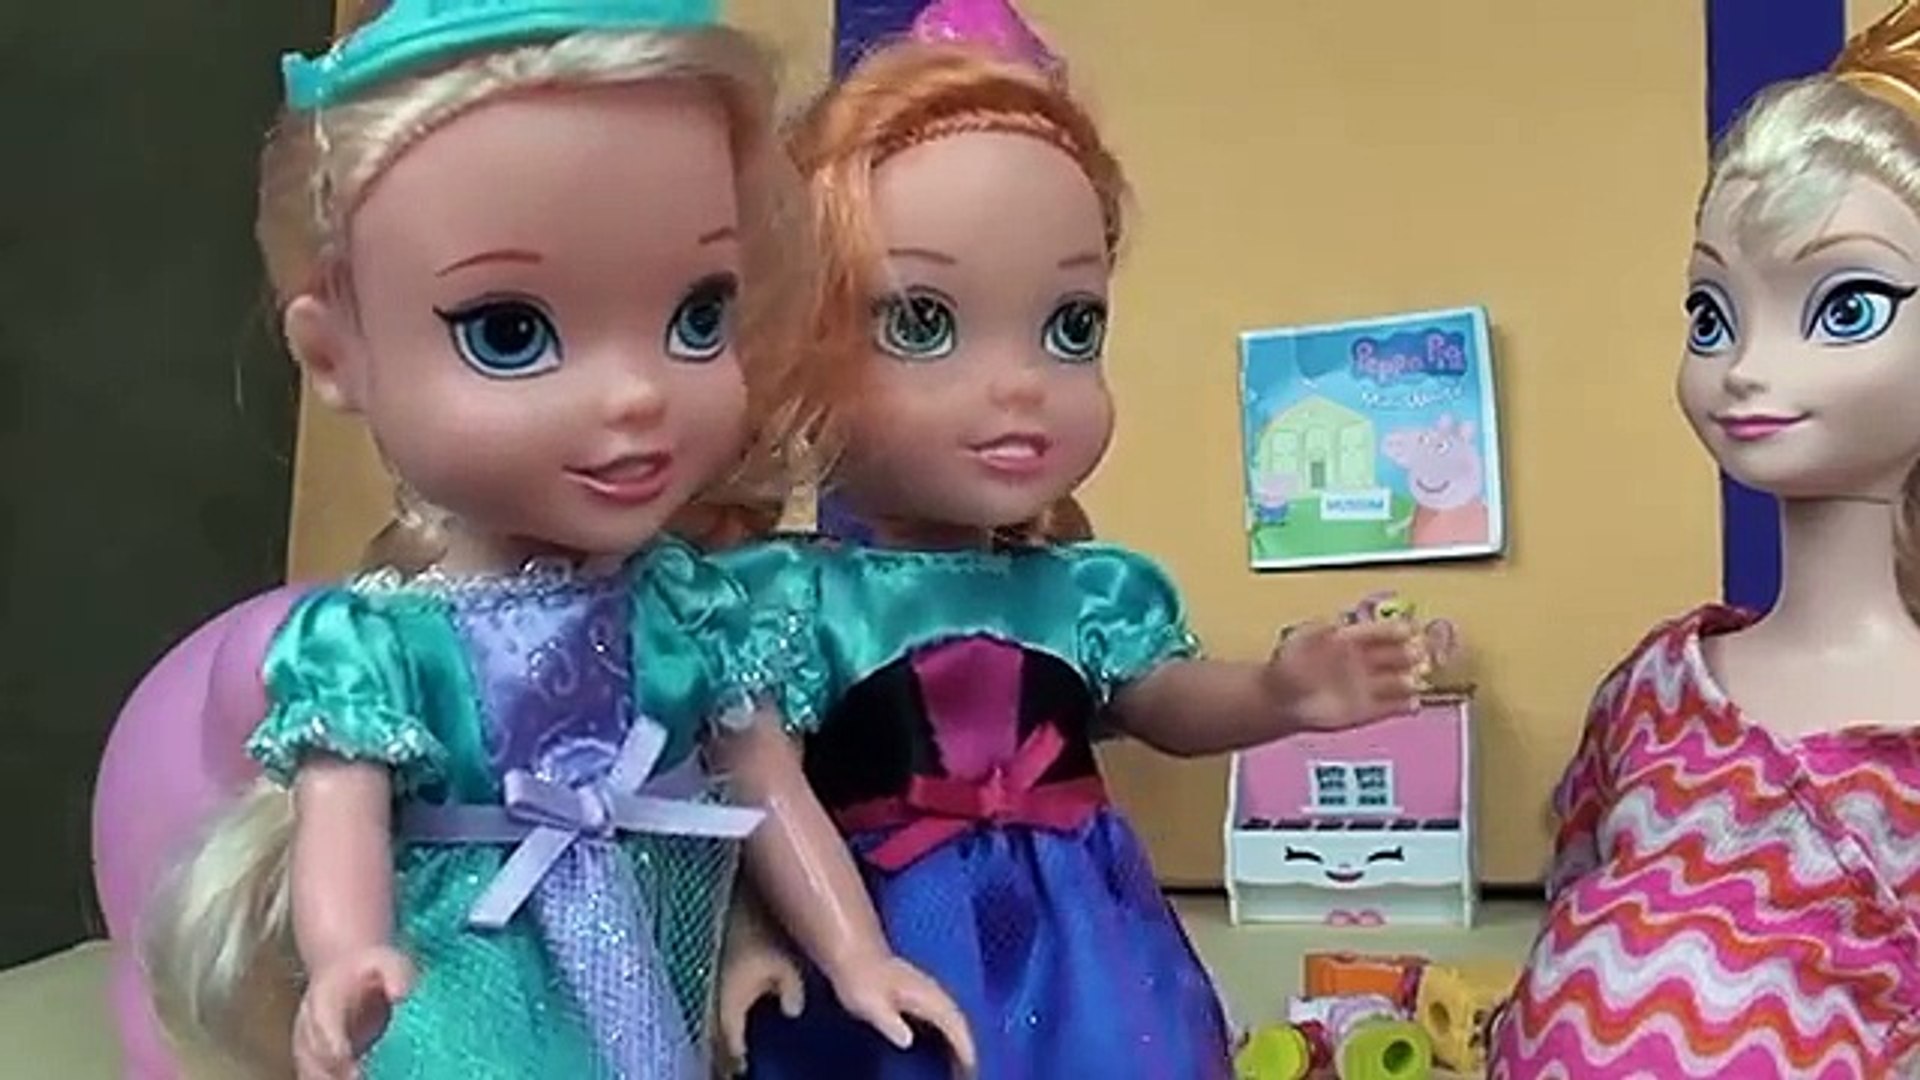 where to buy annia and elsia dolls